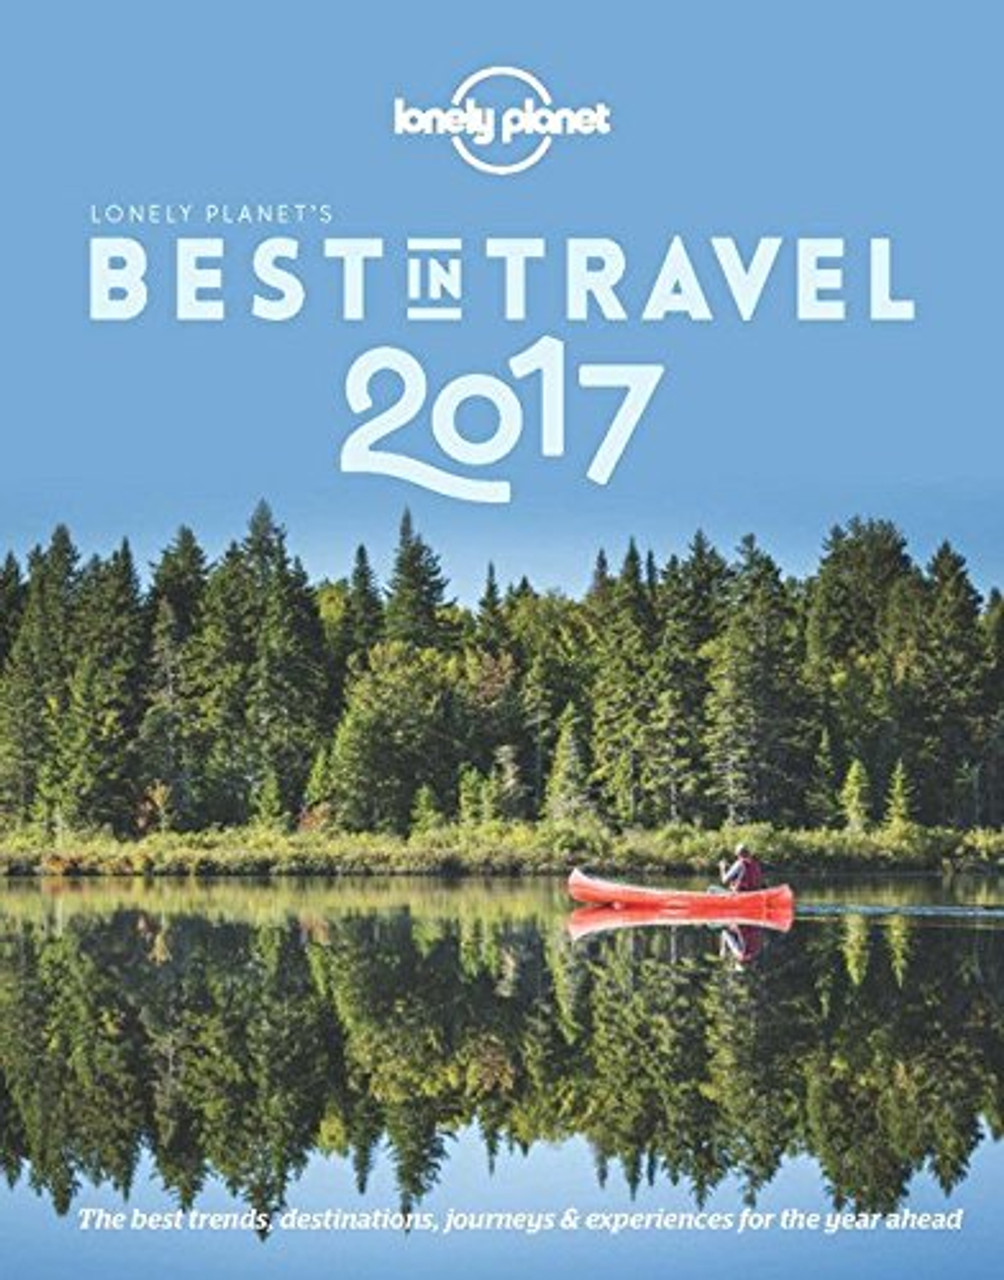 BookPal　Travel　Lonely　in　(12TH　Planet's　ed.)　Best　2017